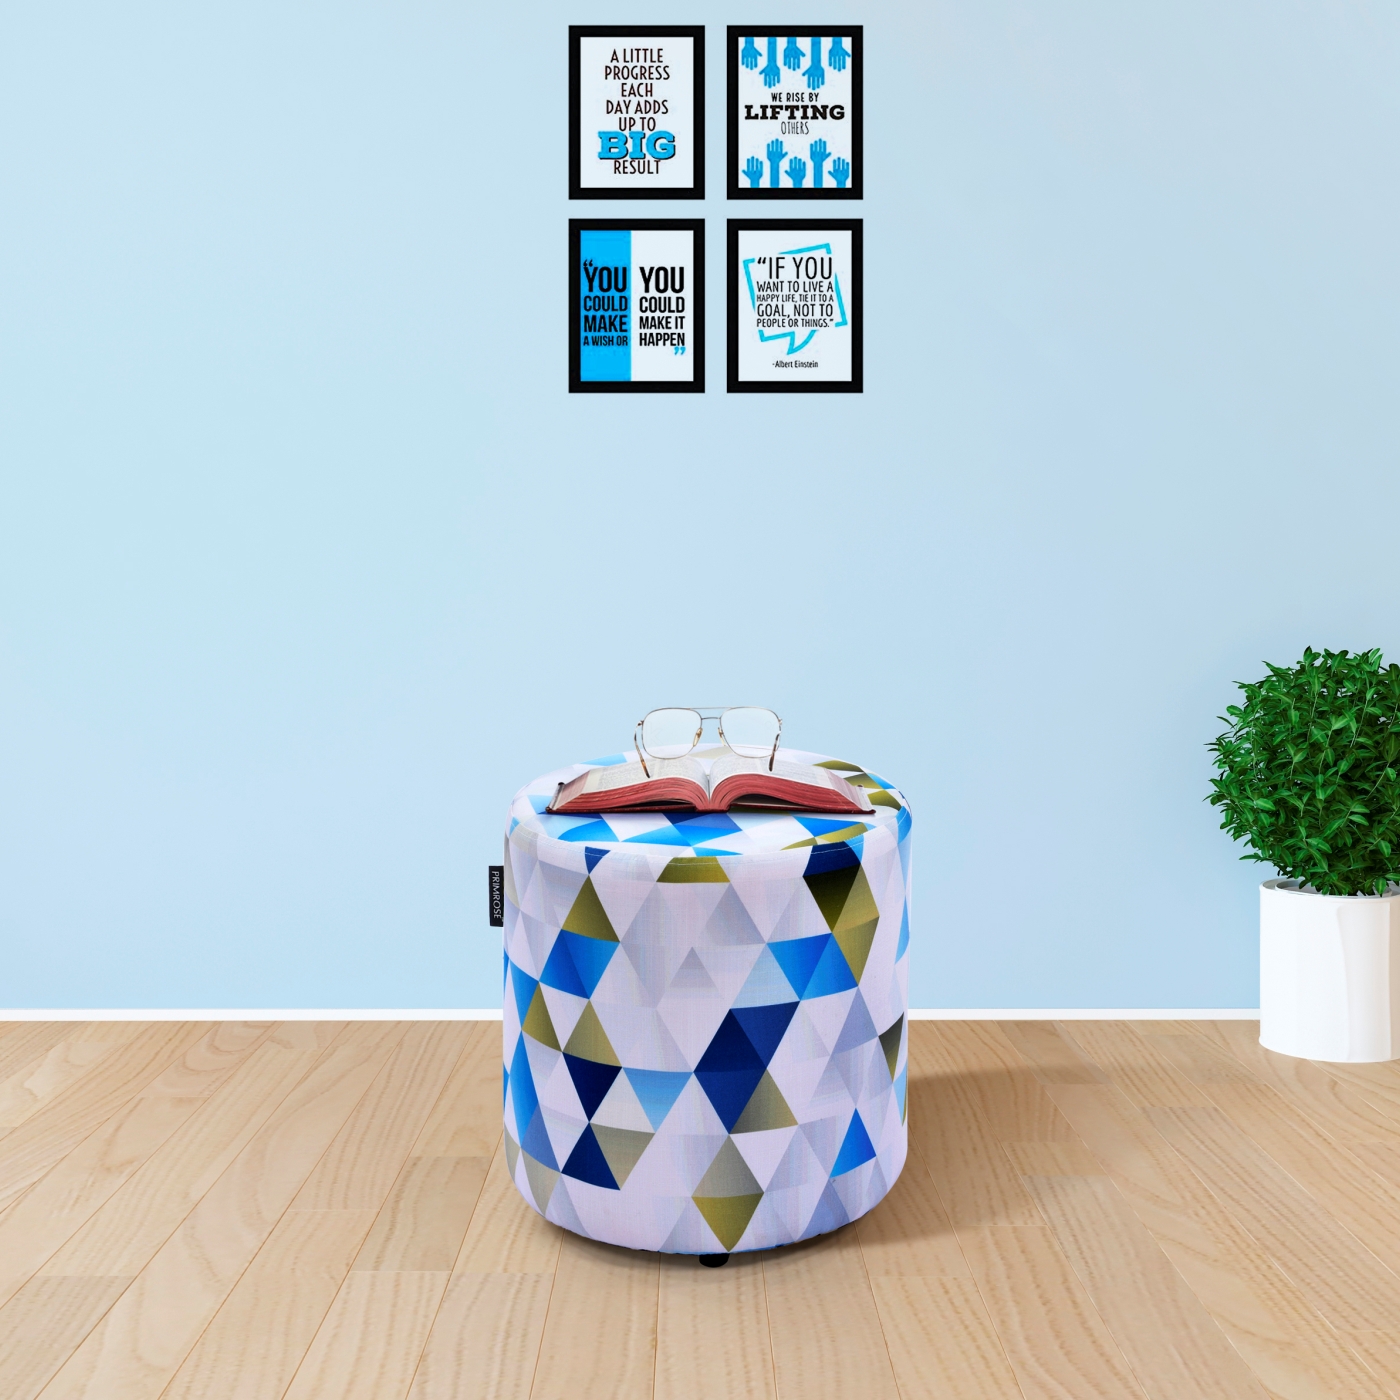 PRIMROSE Abstract Triangle Digital Printed Faux Linen Fabric Ottoman 16.5 X 16.5 Inch - White, Blue  